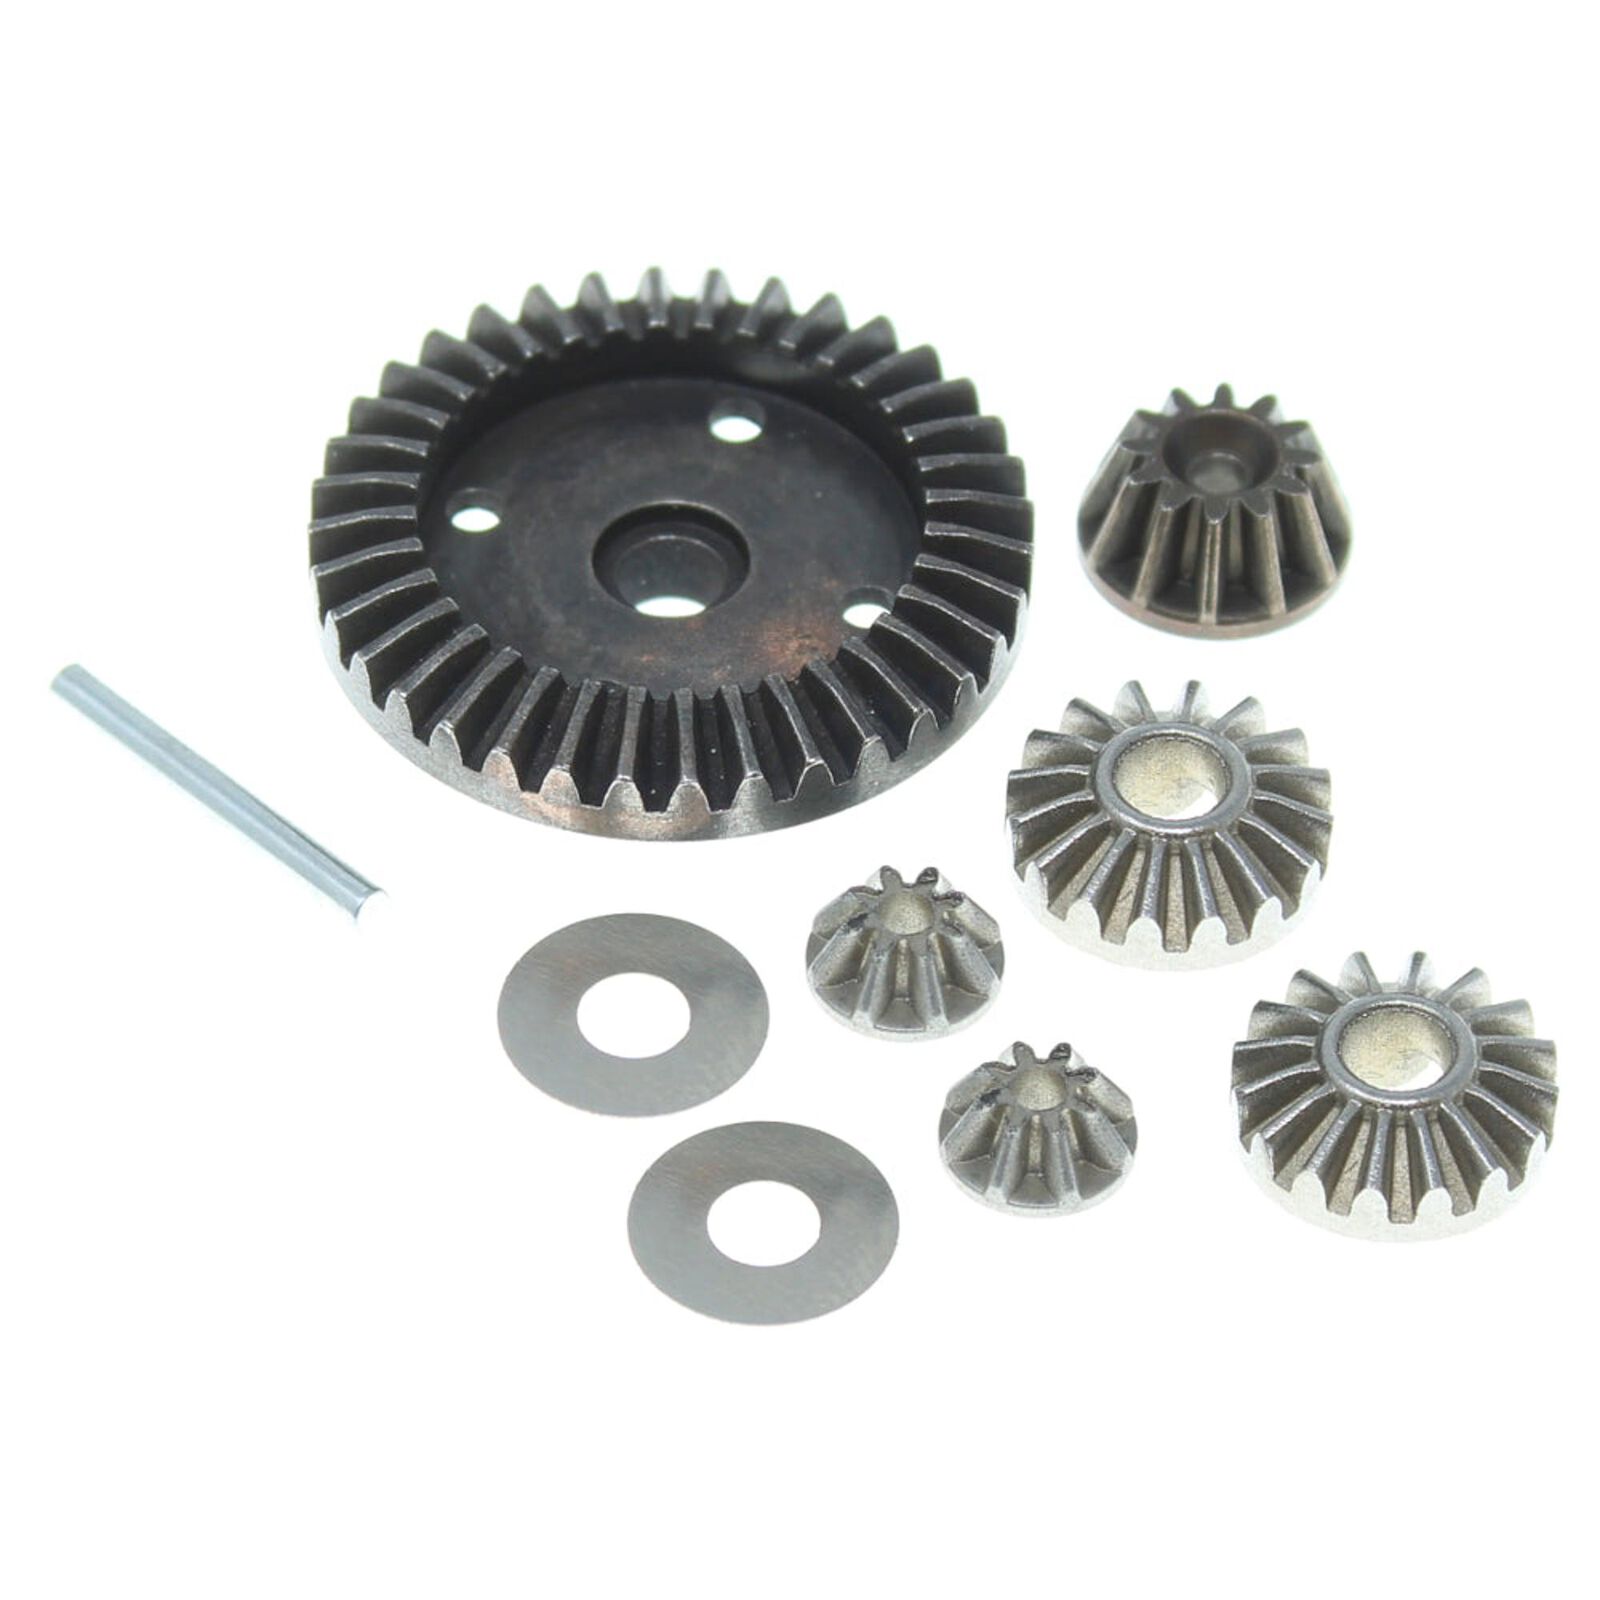 Machined Diff Gears, Metal (2)